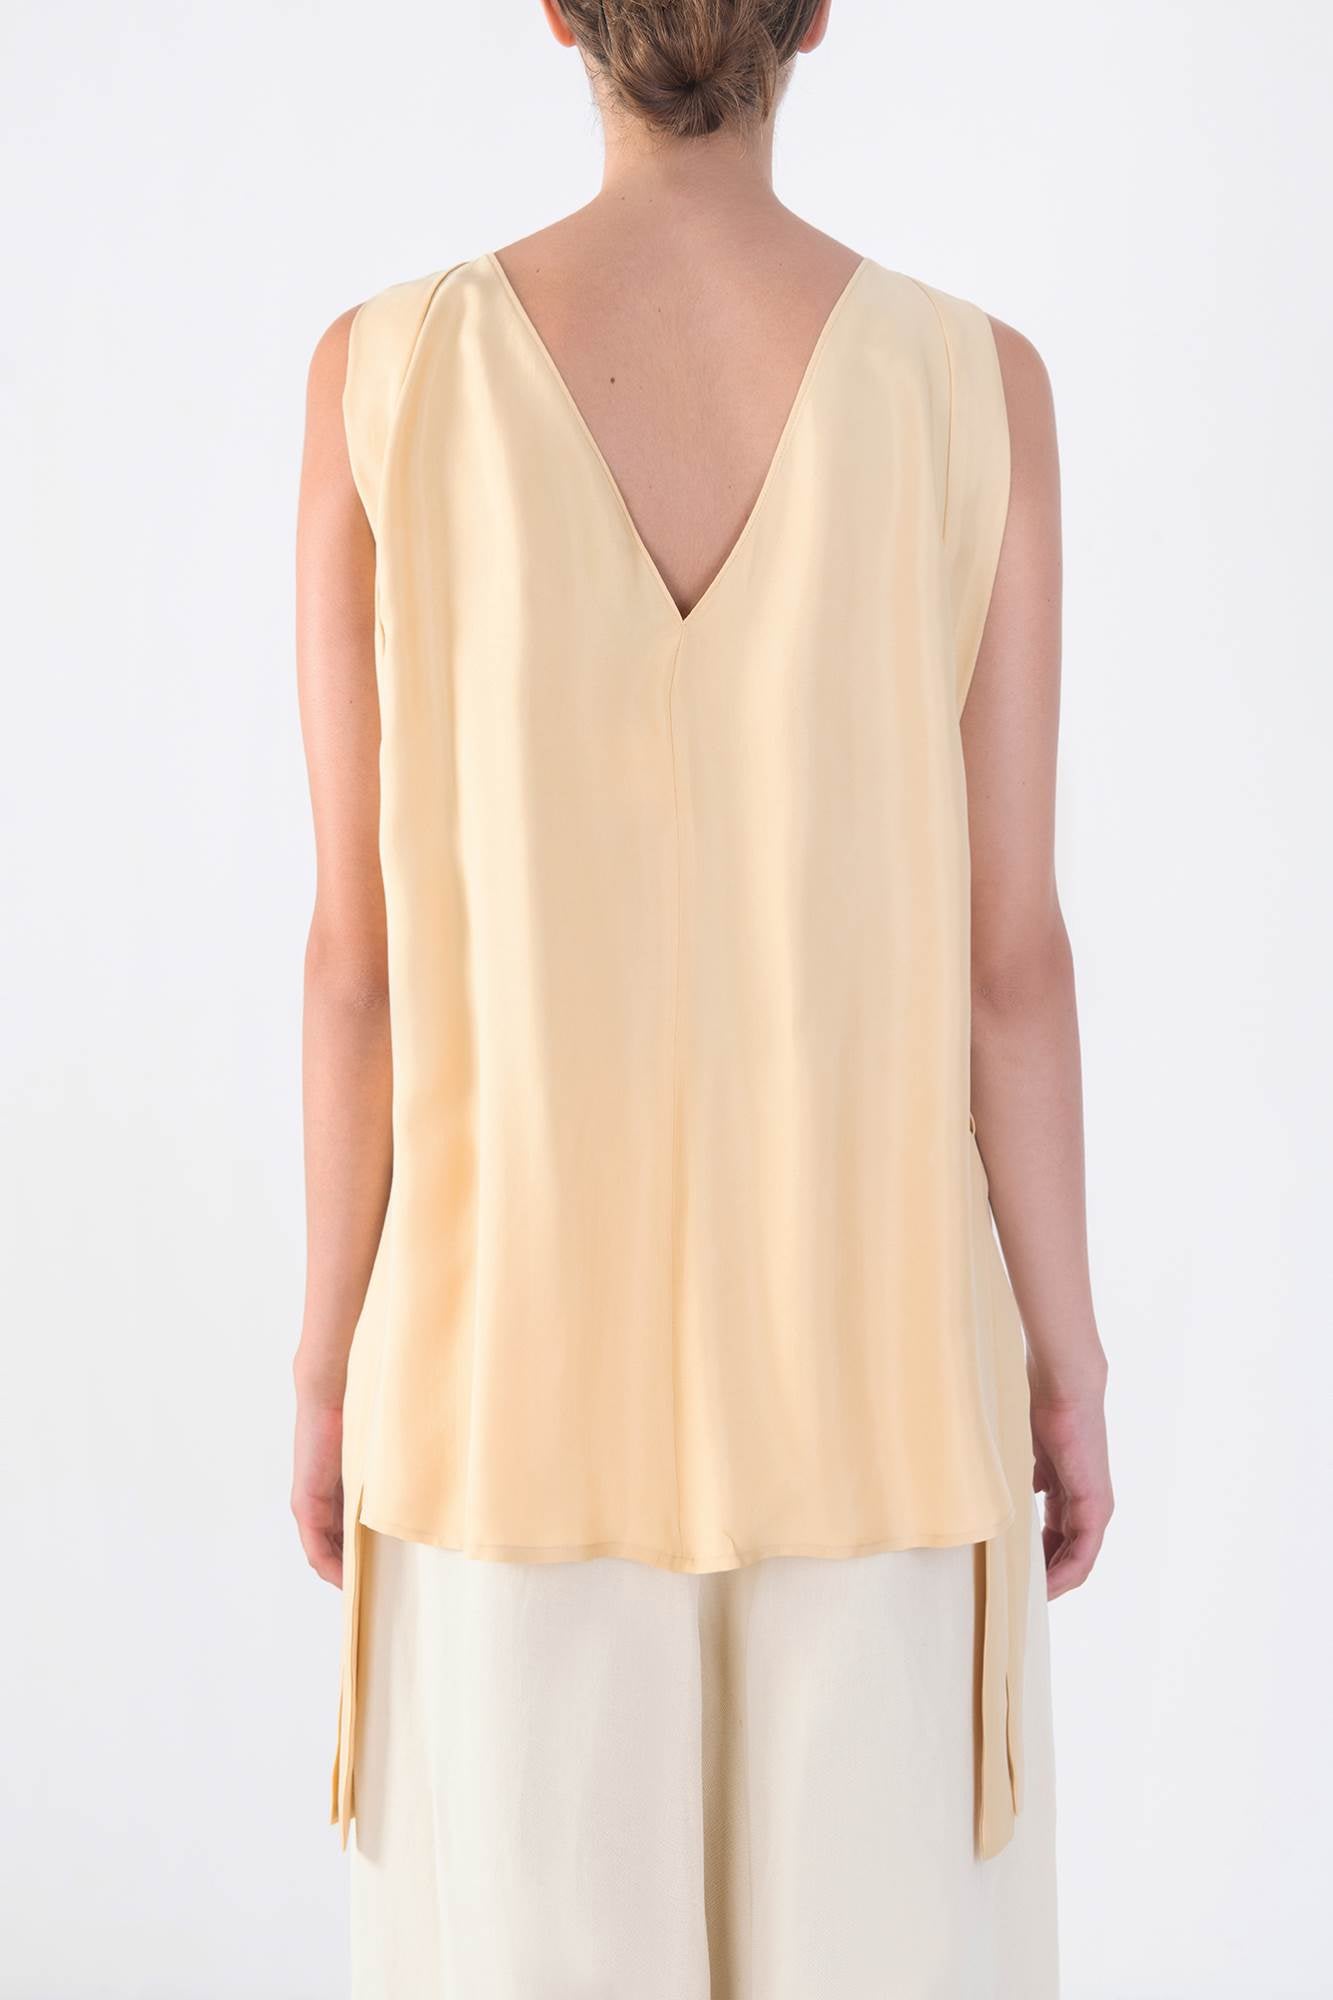 “V” neckline top with matching ribbons